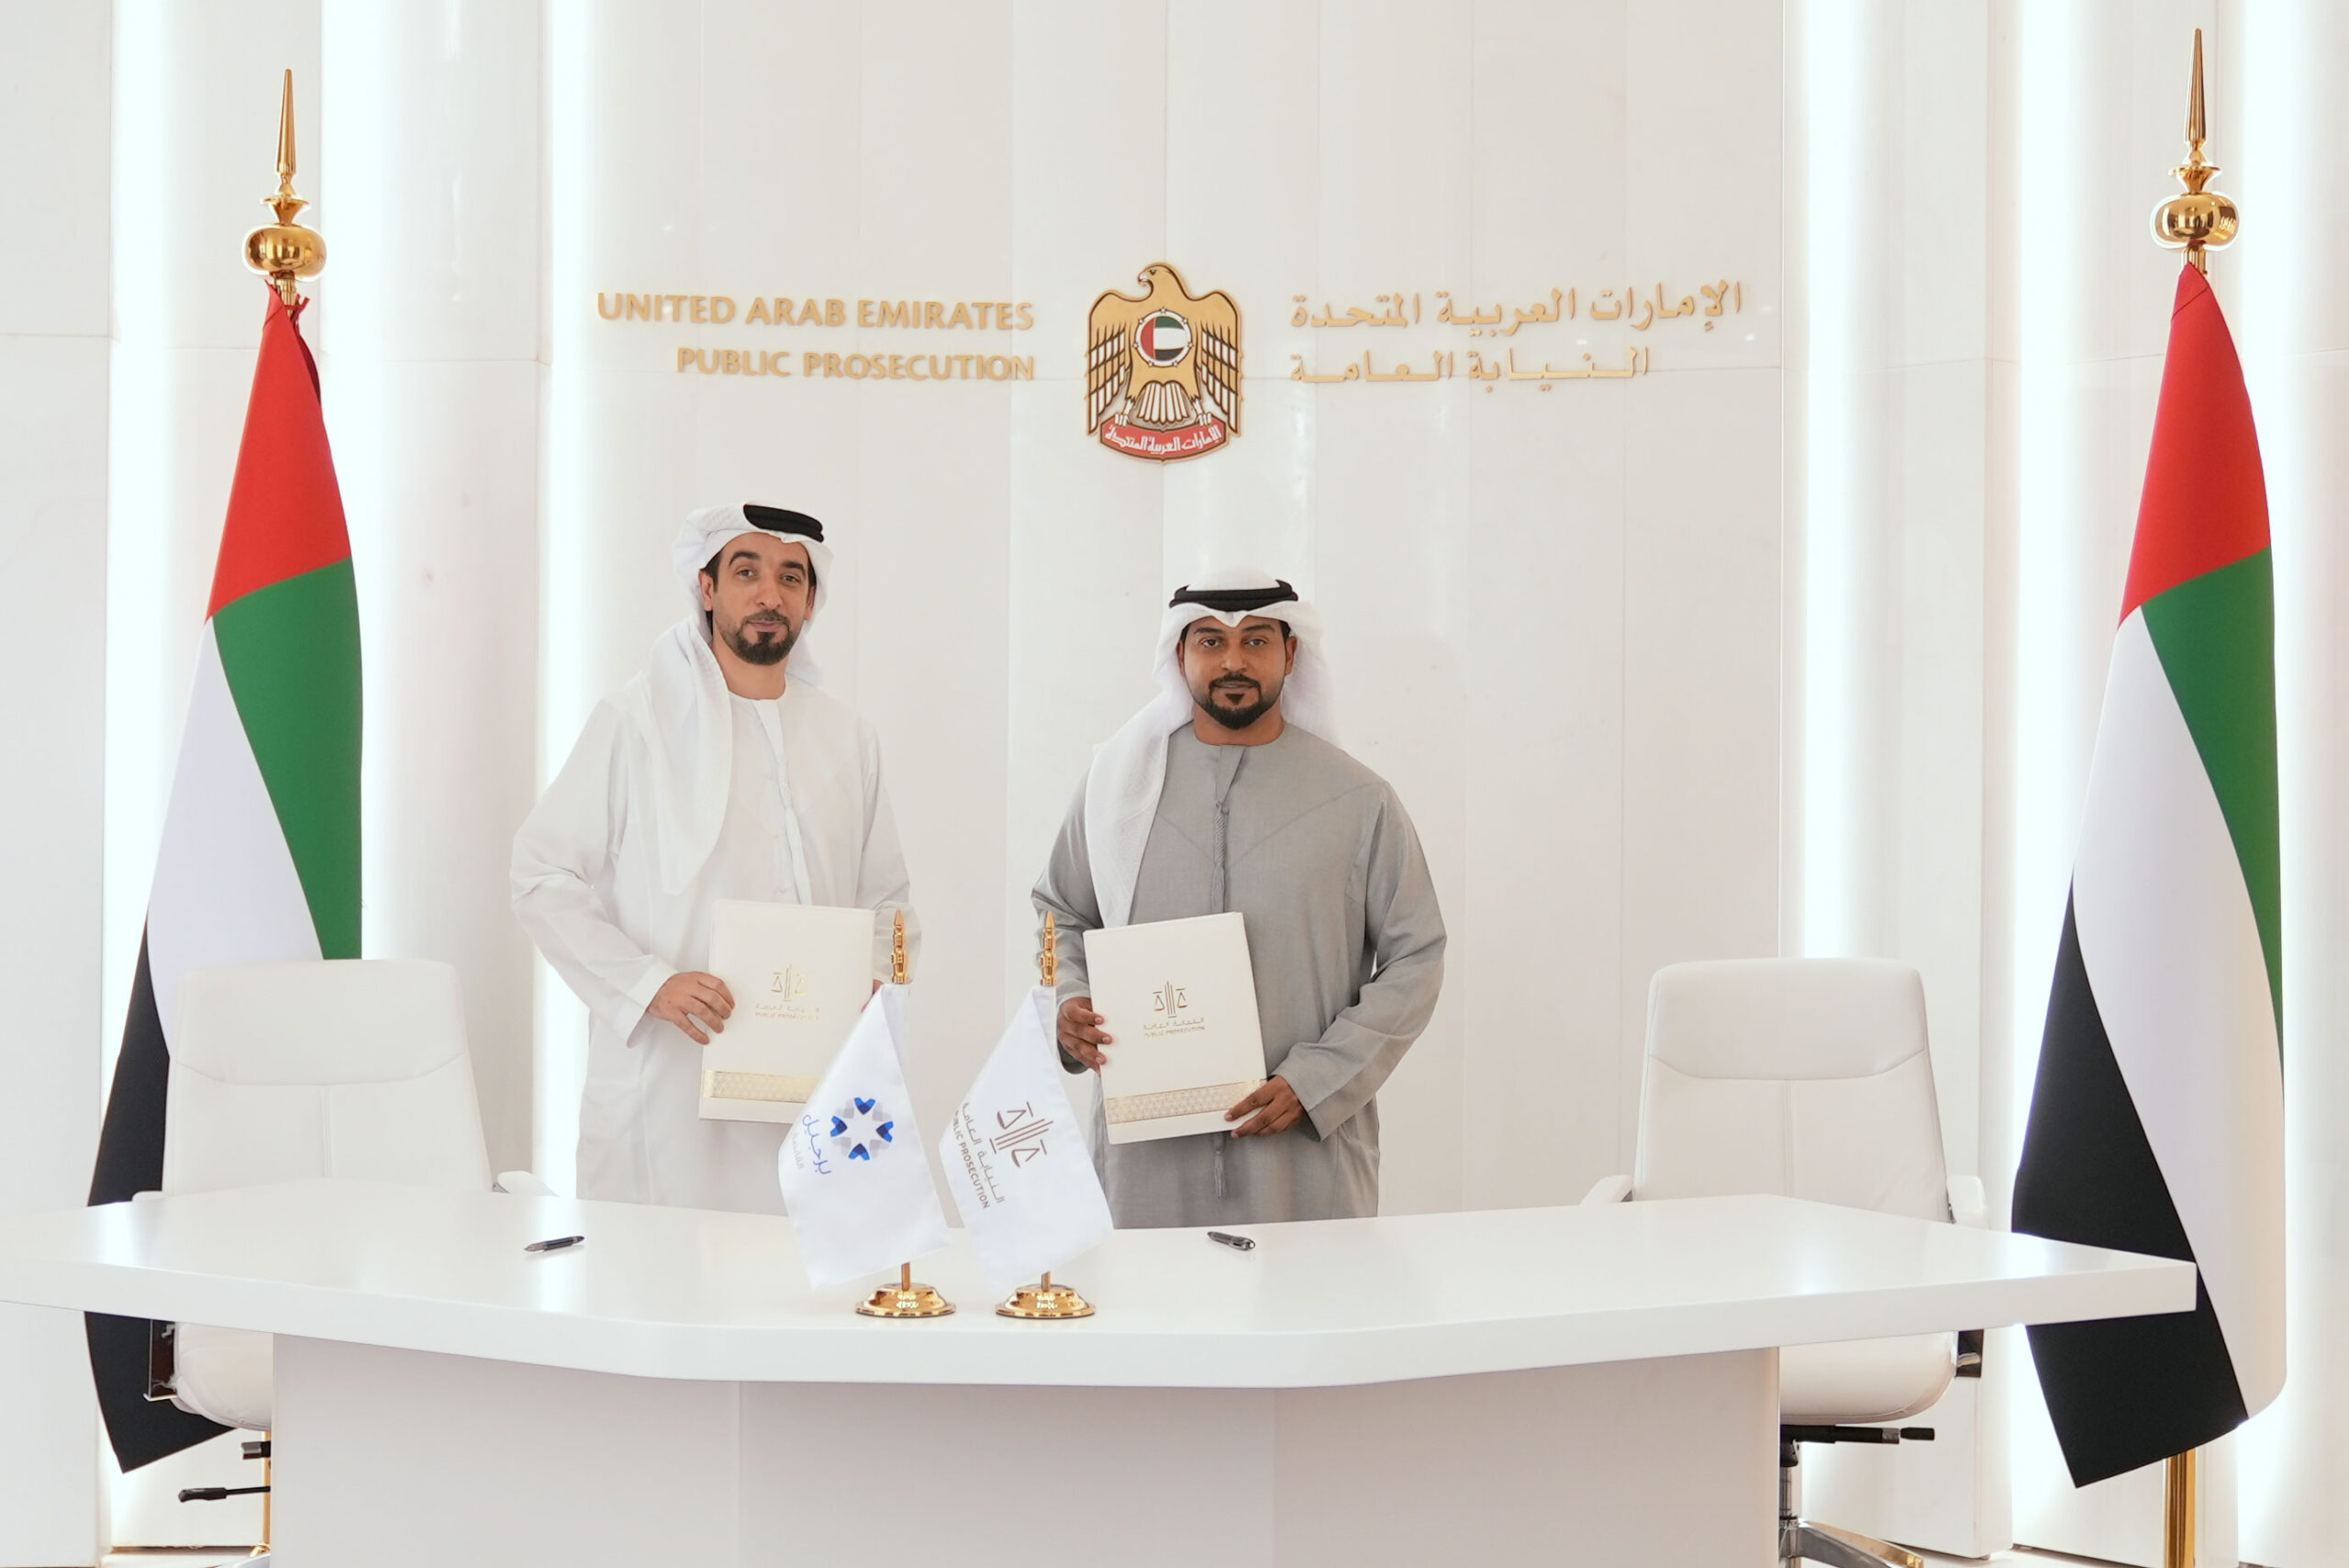 UAE Public Prosecution Signs Cooperation Agreement with Burjeel Holdings to Enhance Healthcare Services 